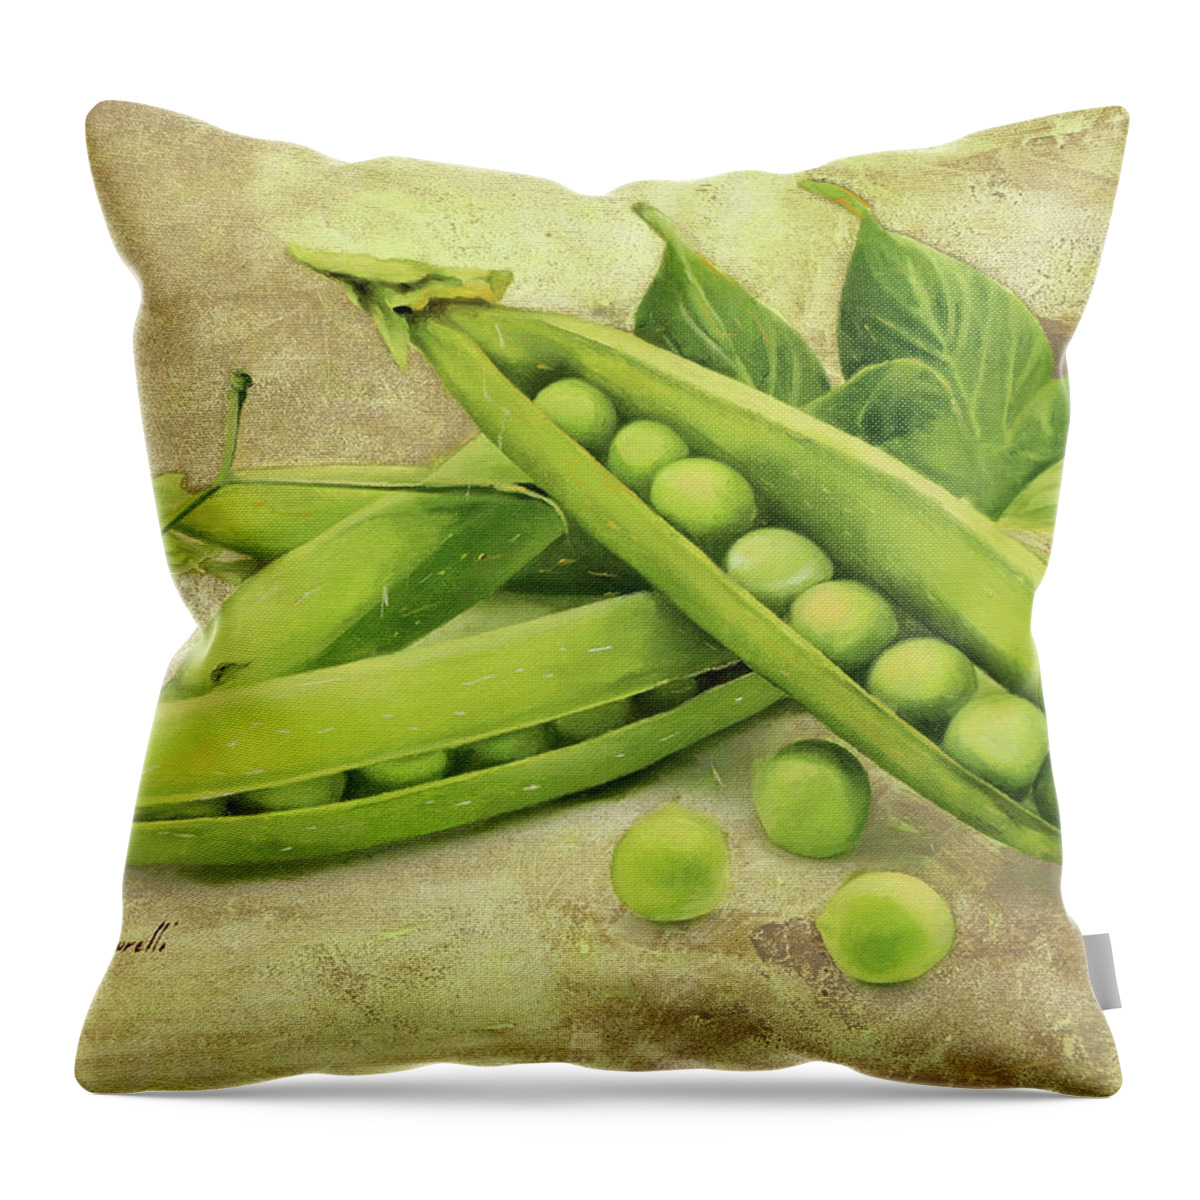 Pea Throw Pillow featuring the painting Piselli by Guido Borelli